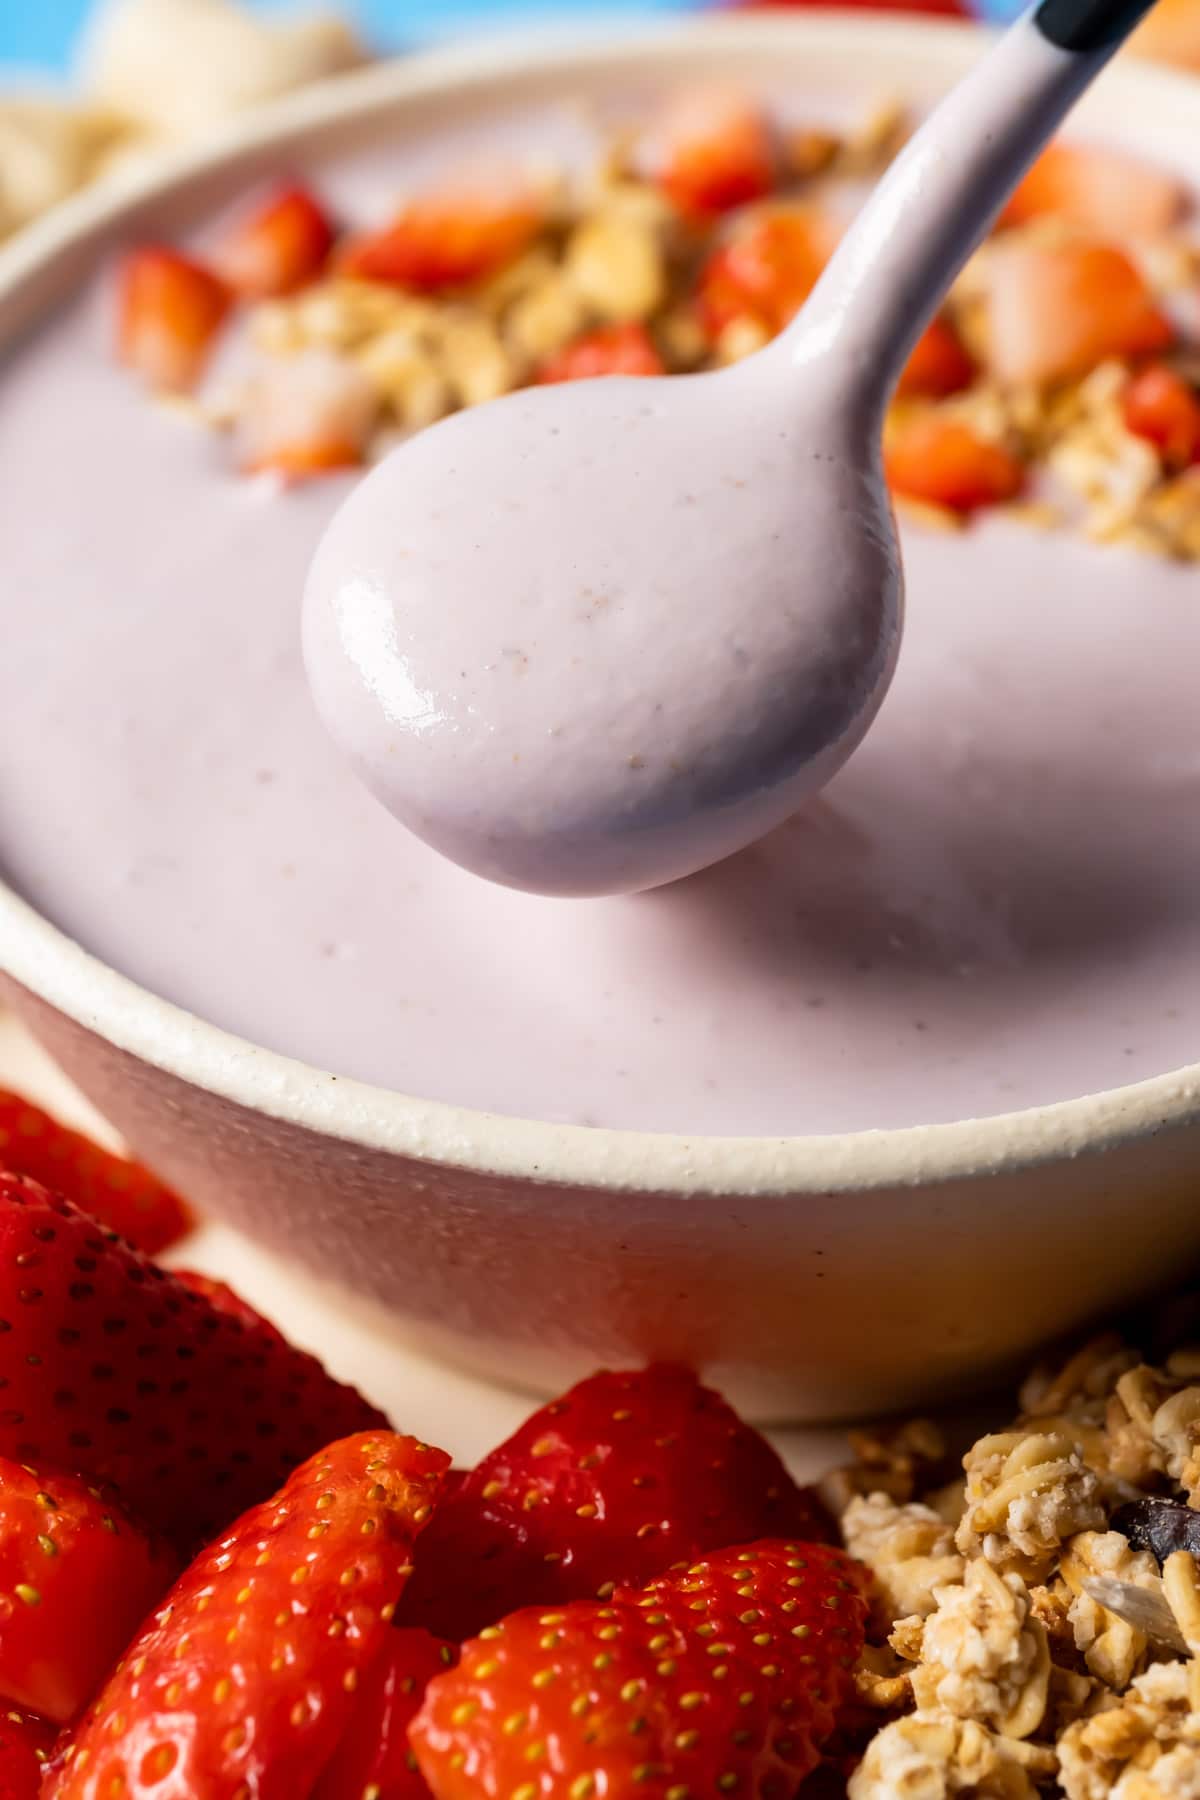 Vegan yogurt topped with granola and sliced strawberries in a bowl with a spoon.